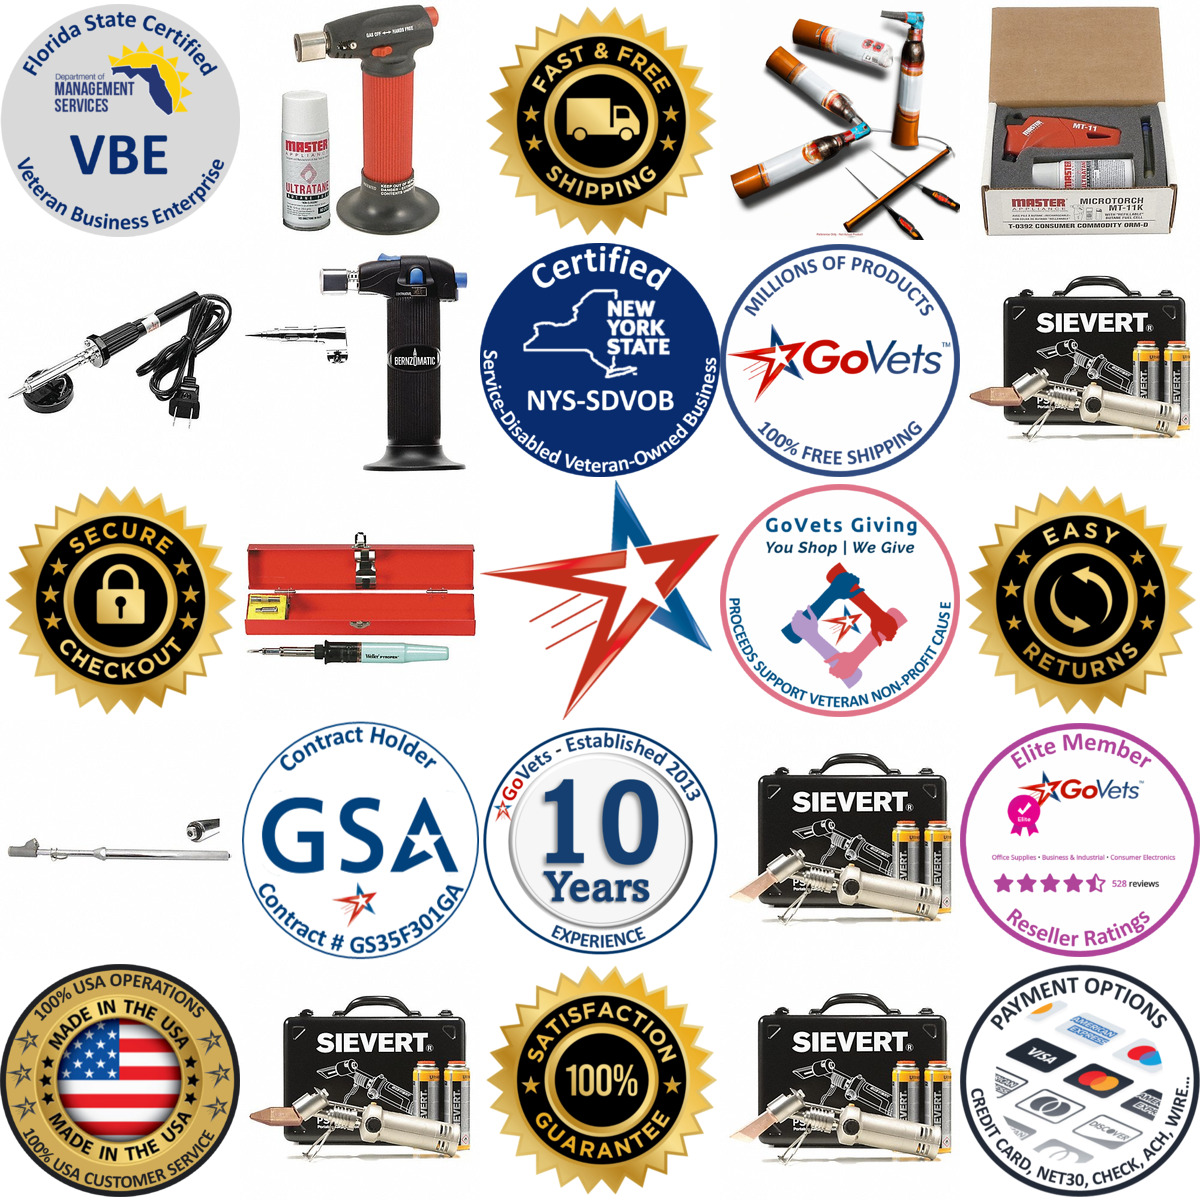 A selection of Butane Soldering Irons Torches Heat Tools and re products on GoVets